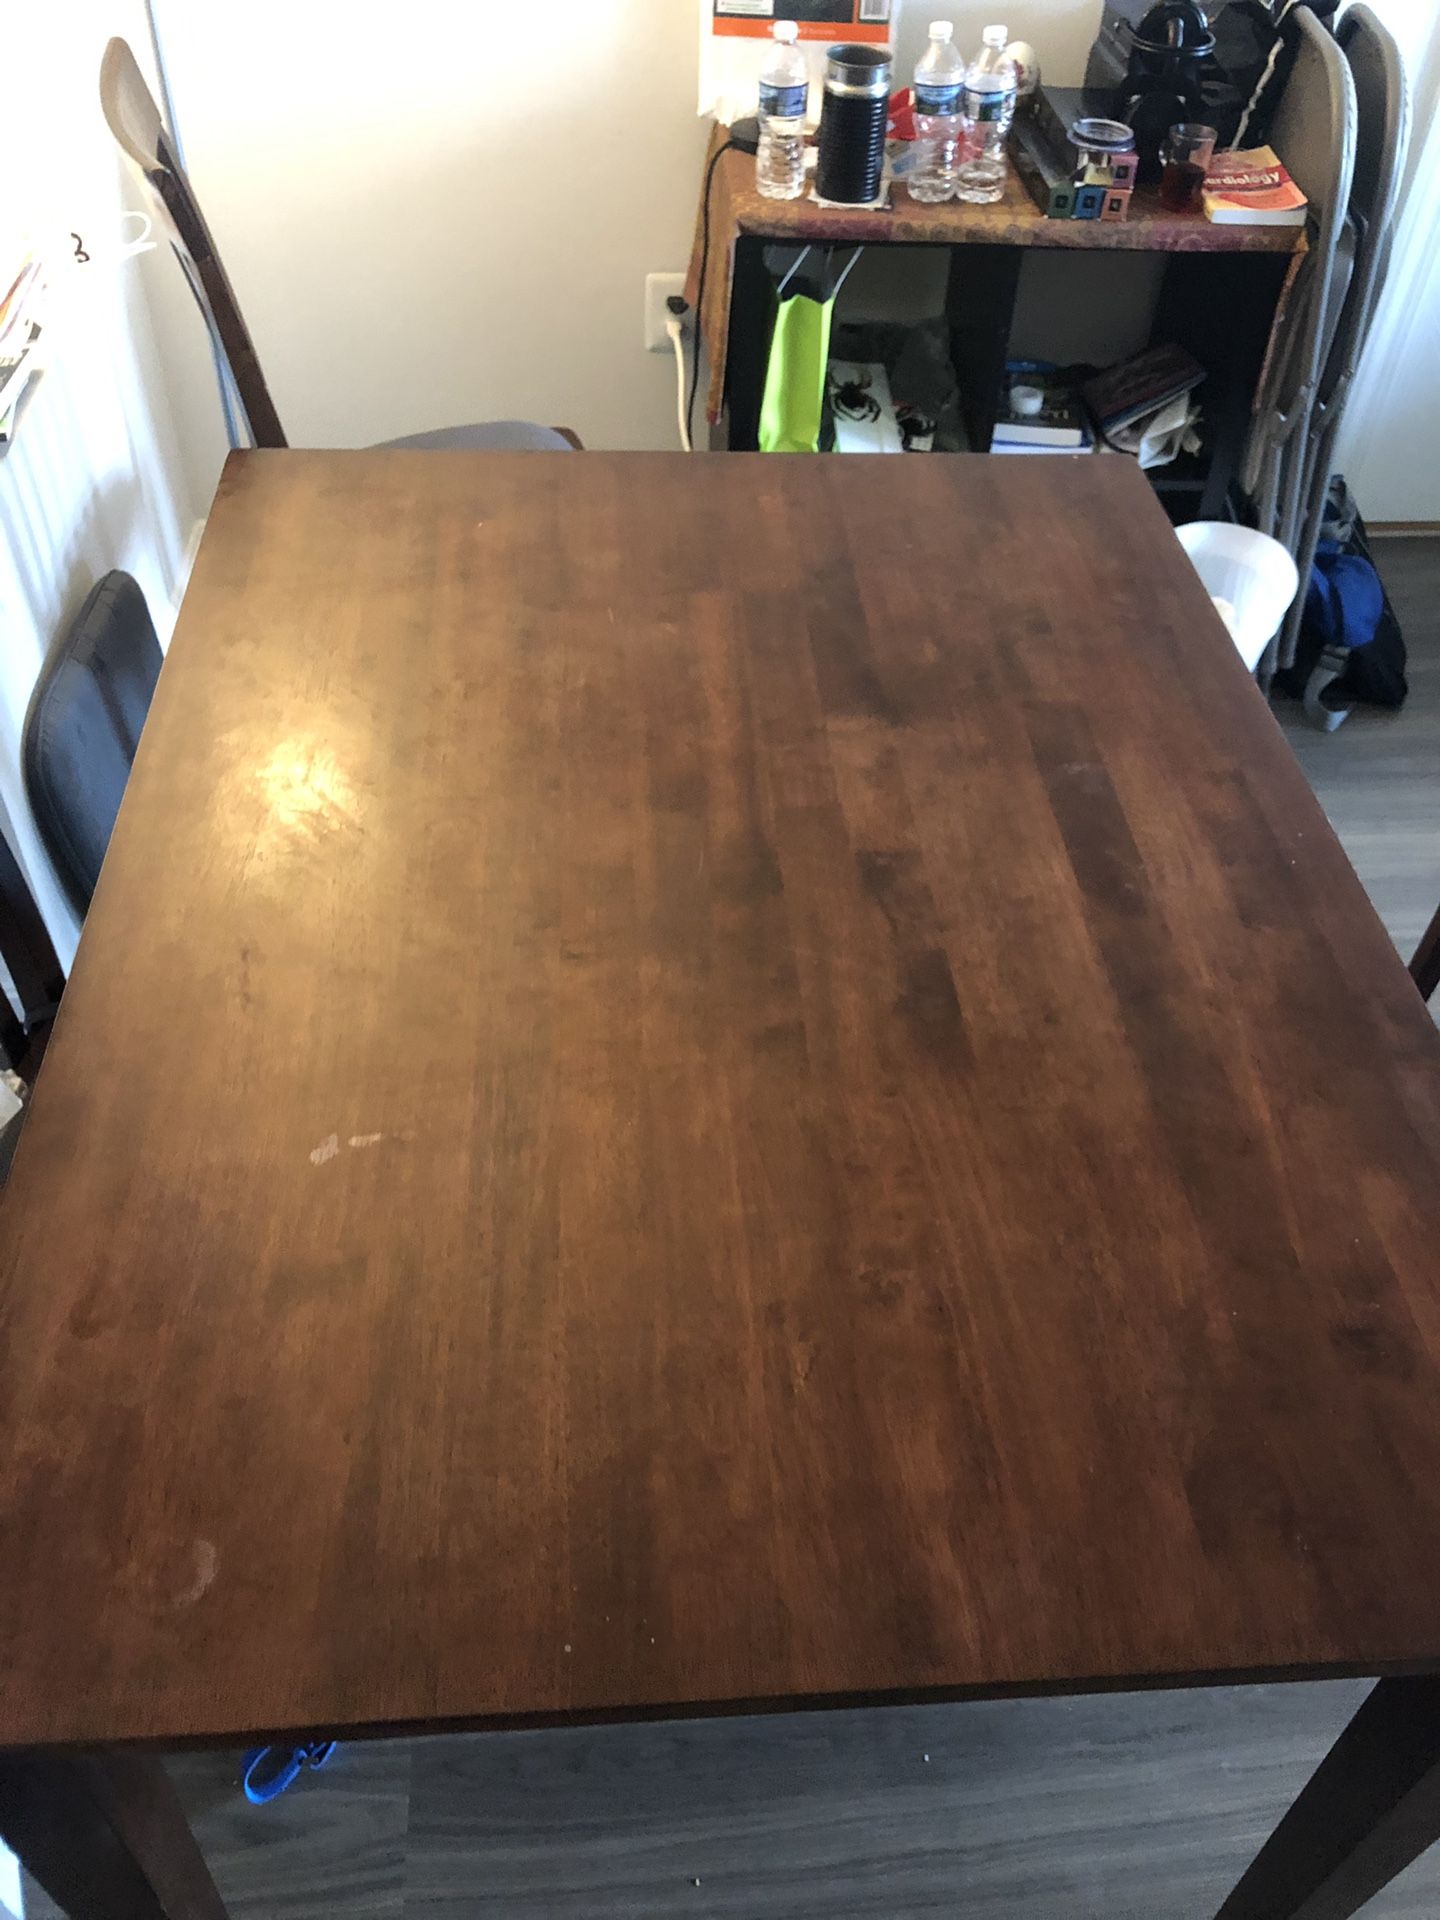 Wood dining table with three chairs